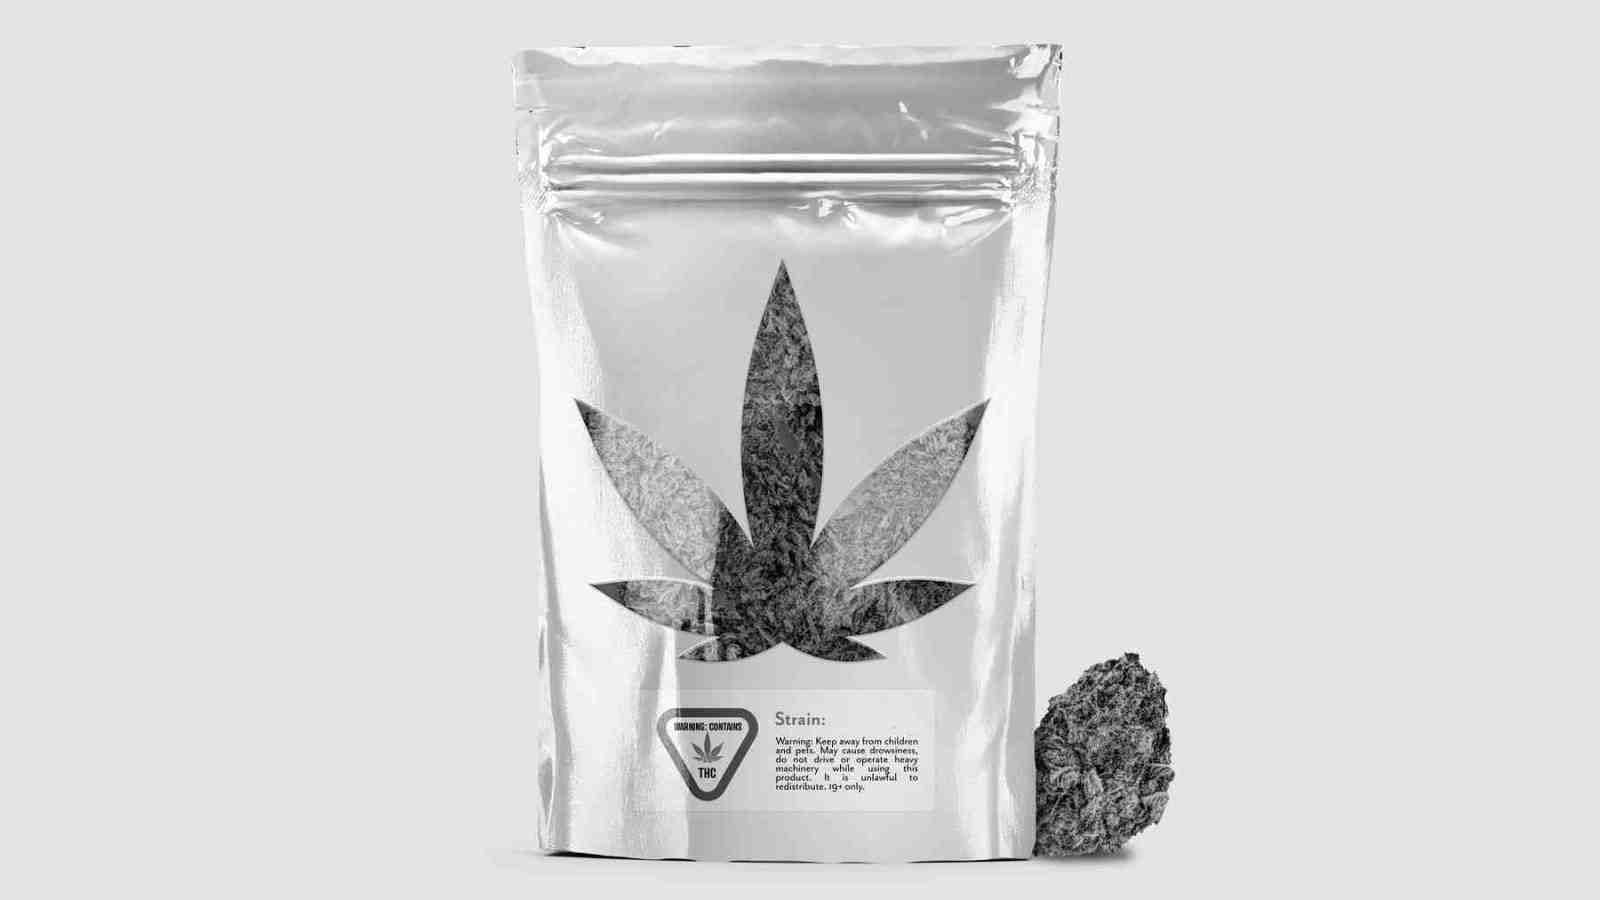 Cannabis Packaging Regulations and Best Practices